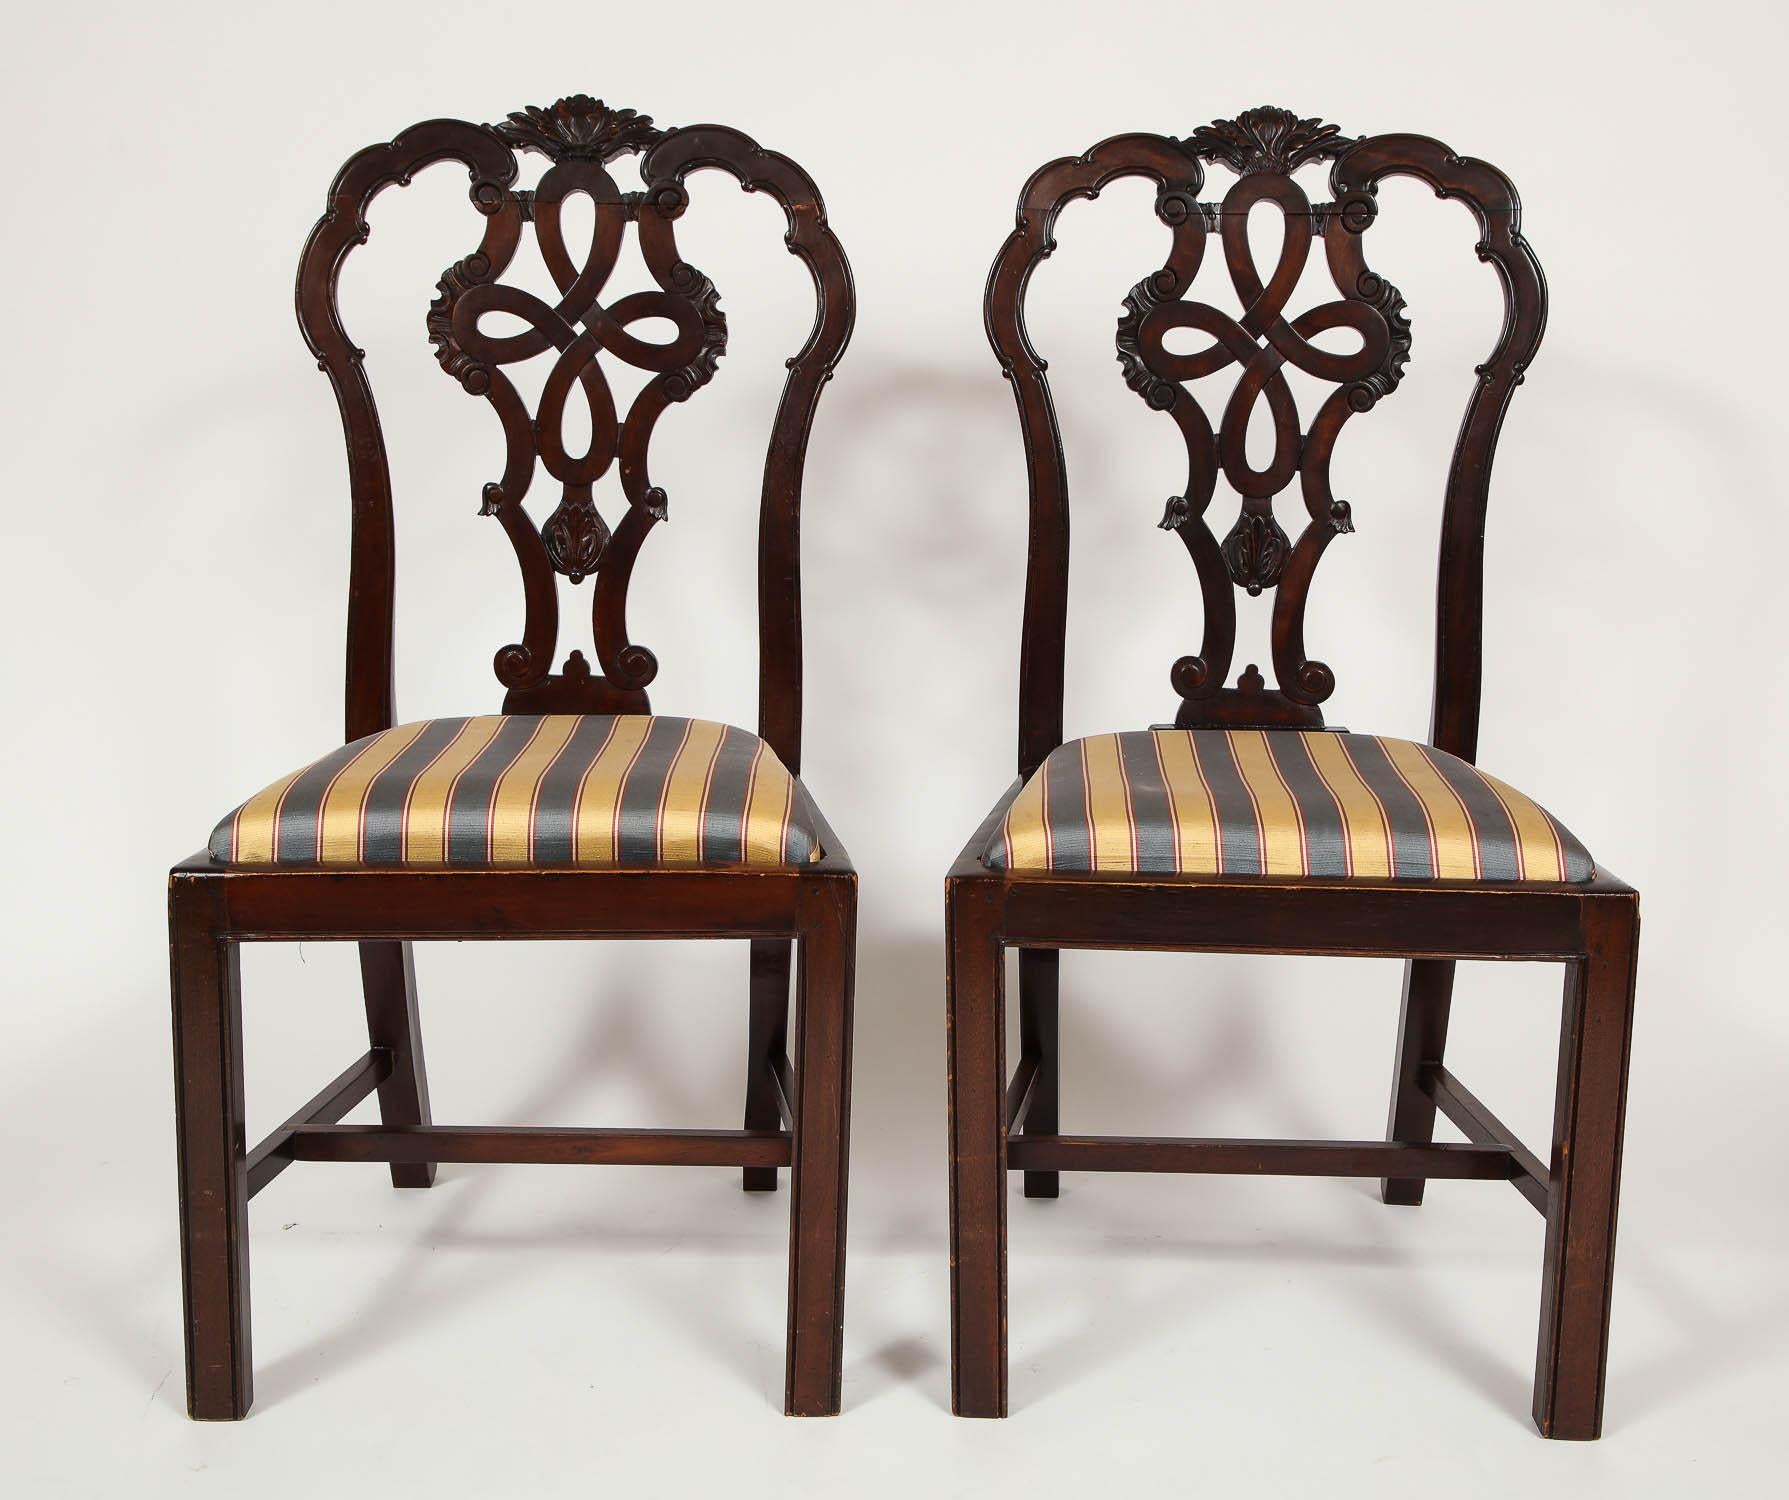 A beautiful set of six hand-carved antique English Chippendale mahogany dining chairs, after the famous Thomas Chippendale. These six beautiful hand-carved mahogany chairs exuberate class and luxury. The naturally dark wood has been magnificently